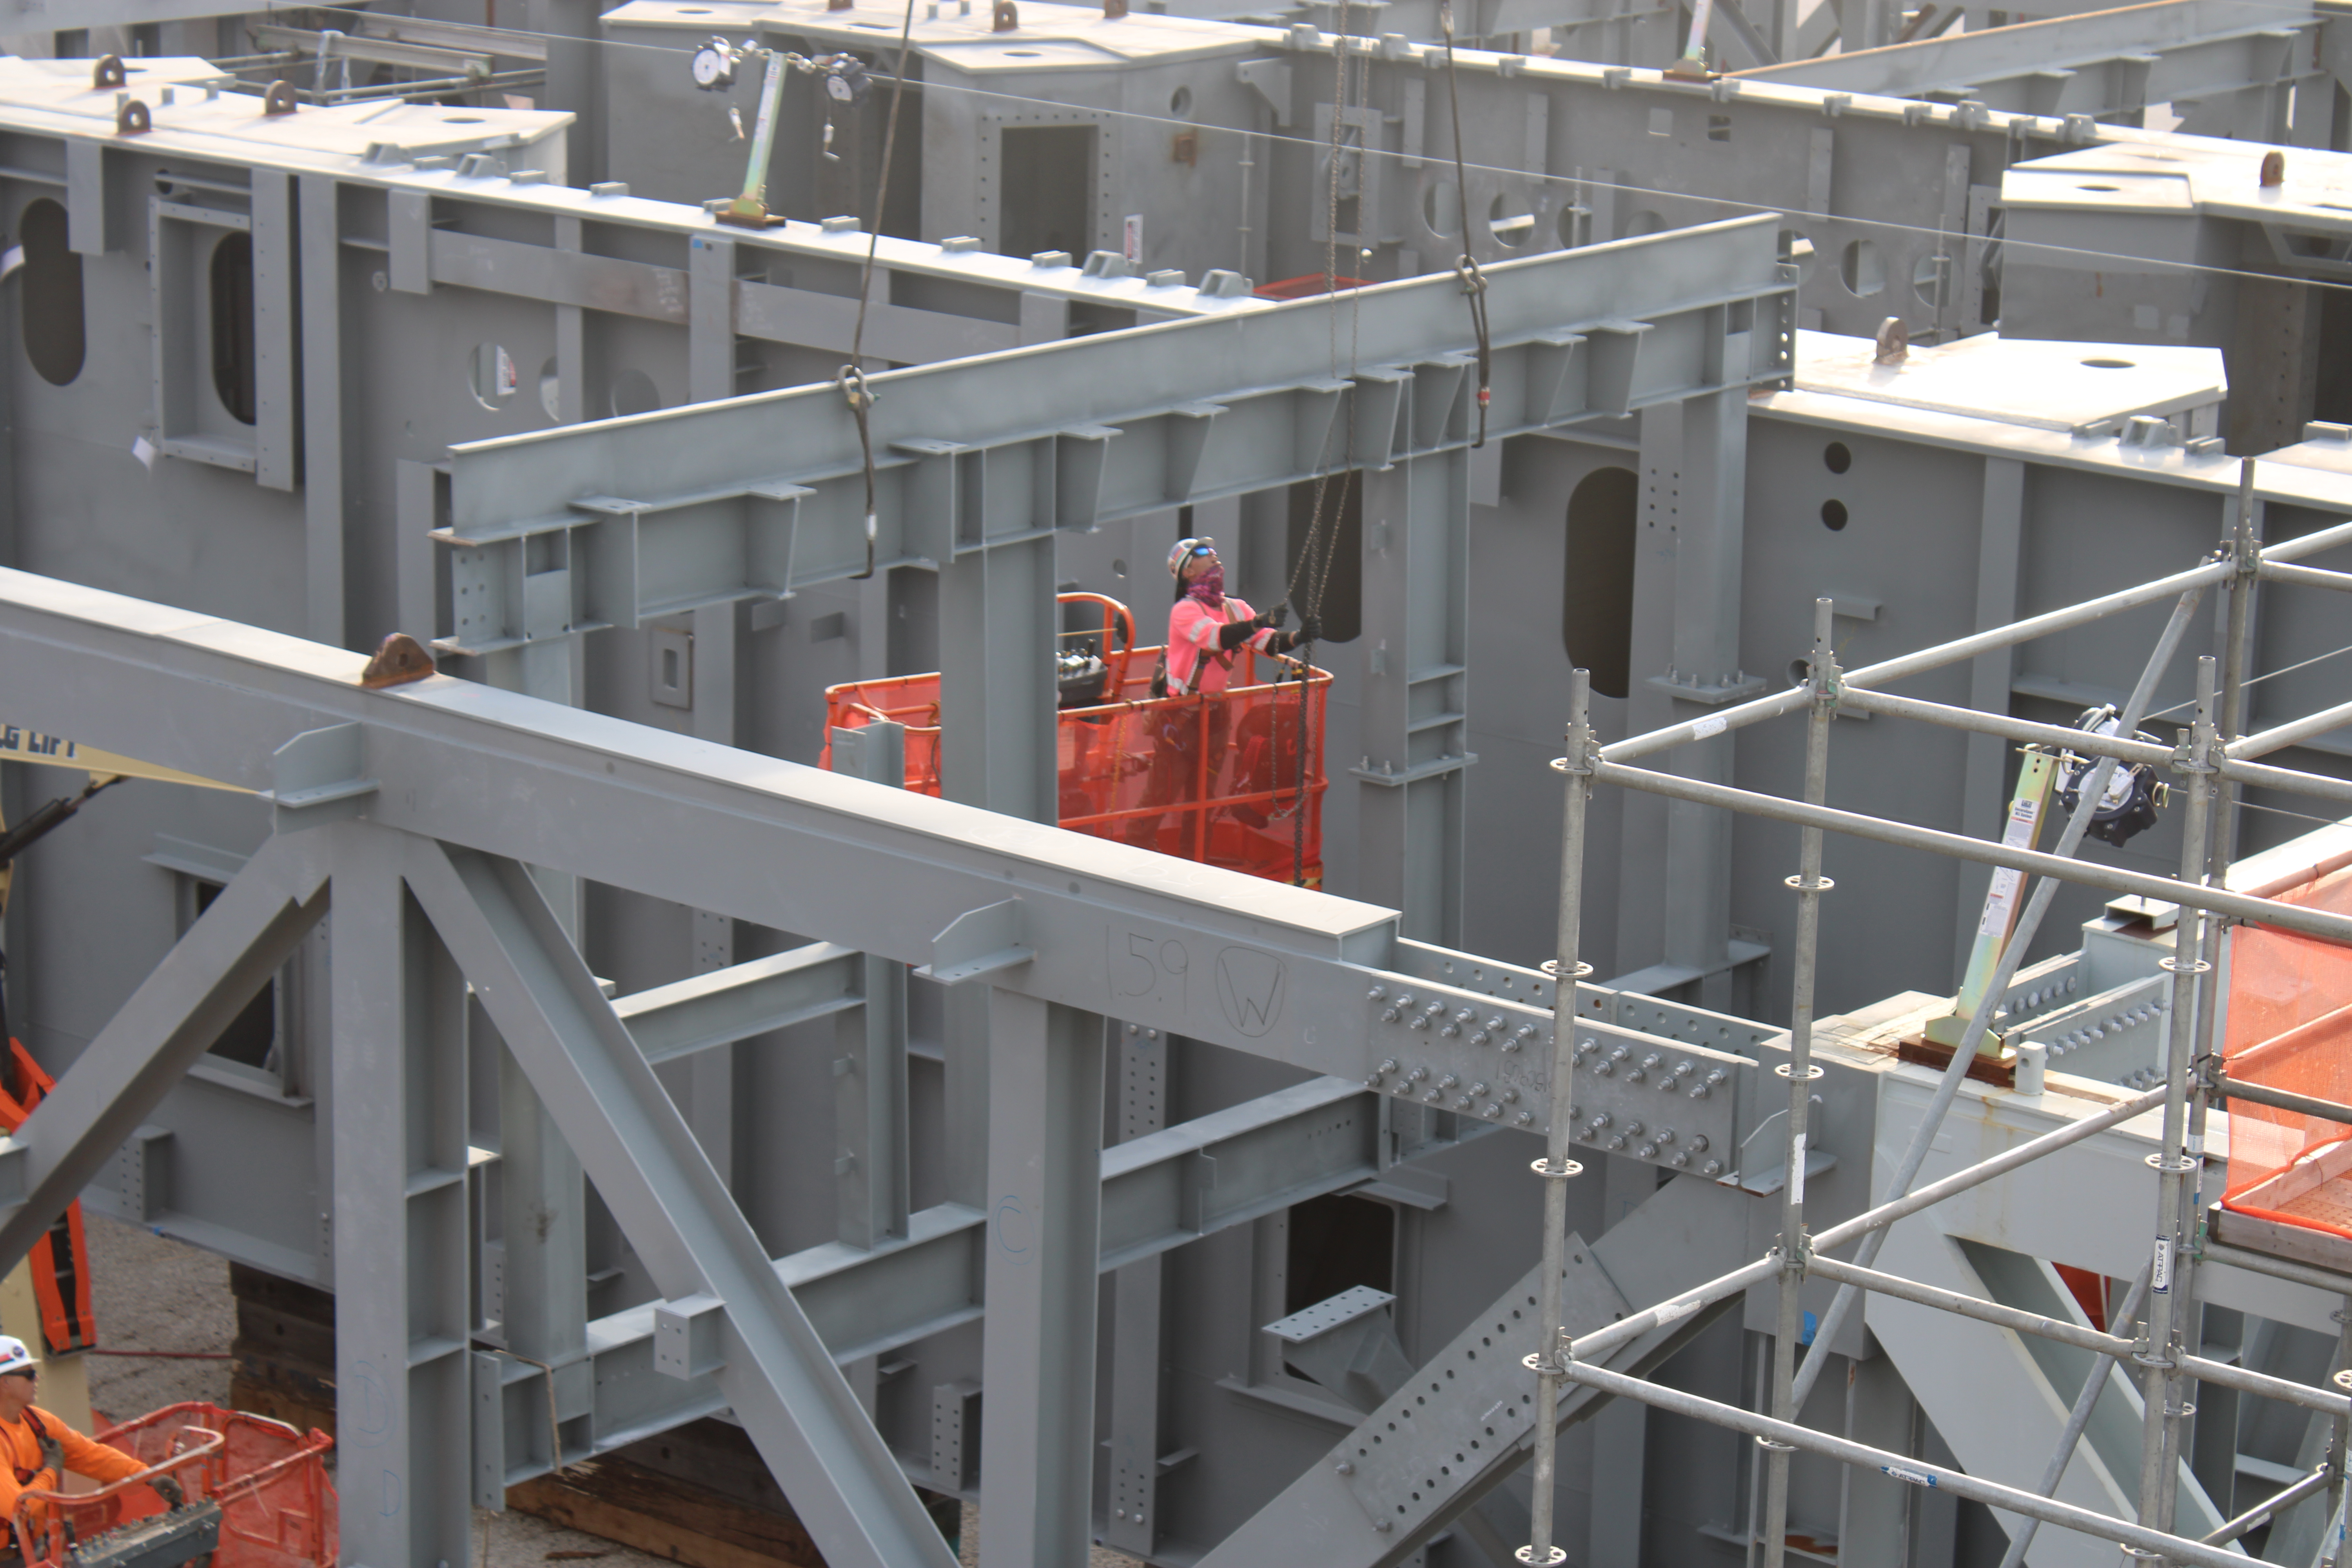 An ironworker guides a truss into place on the mobile launcher 2 base.